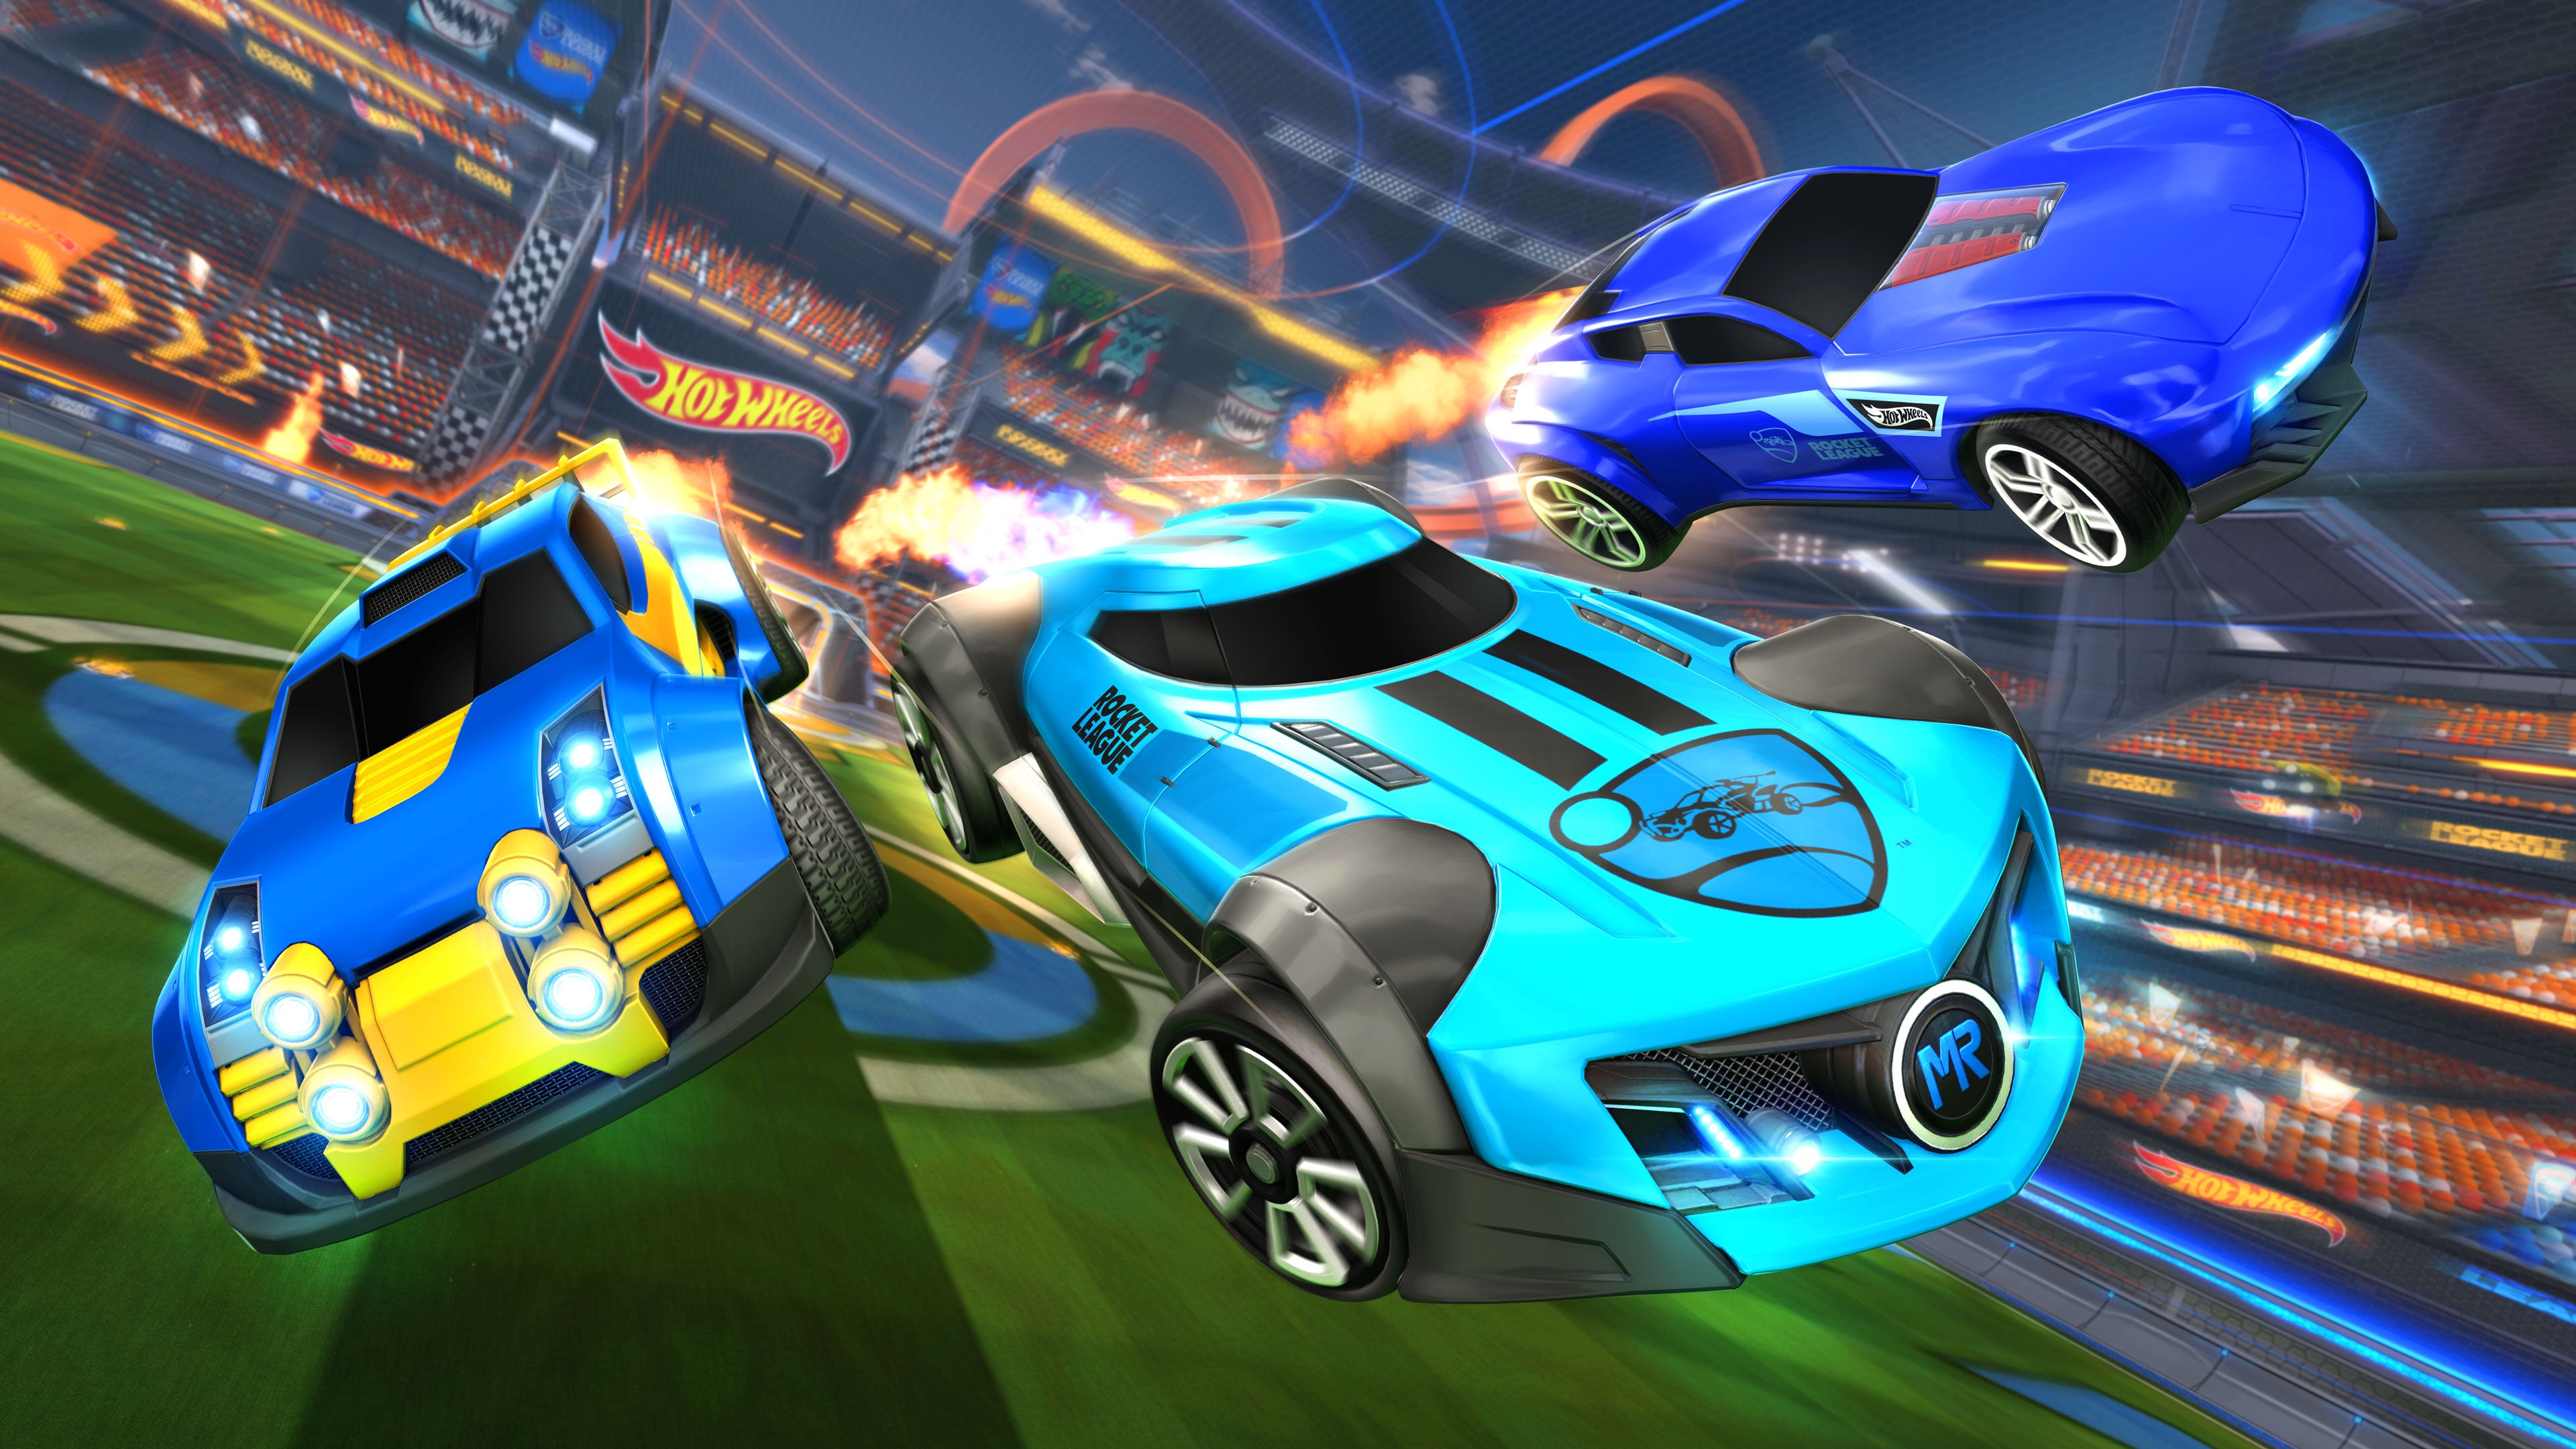 BATTLE WHEELS - Play Online for Free!